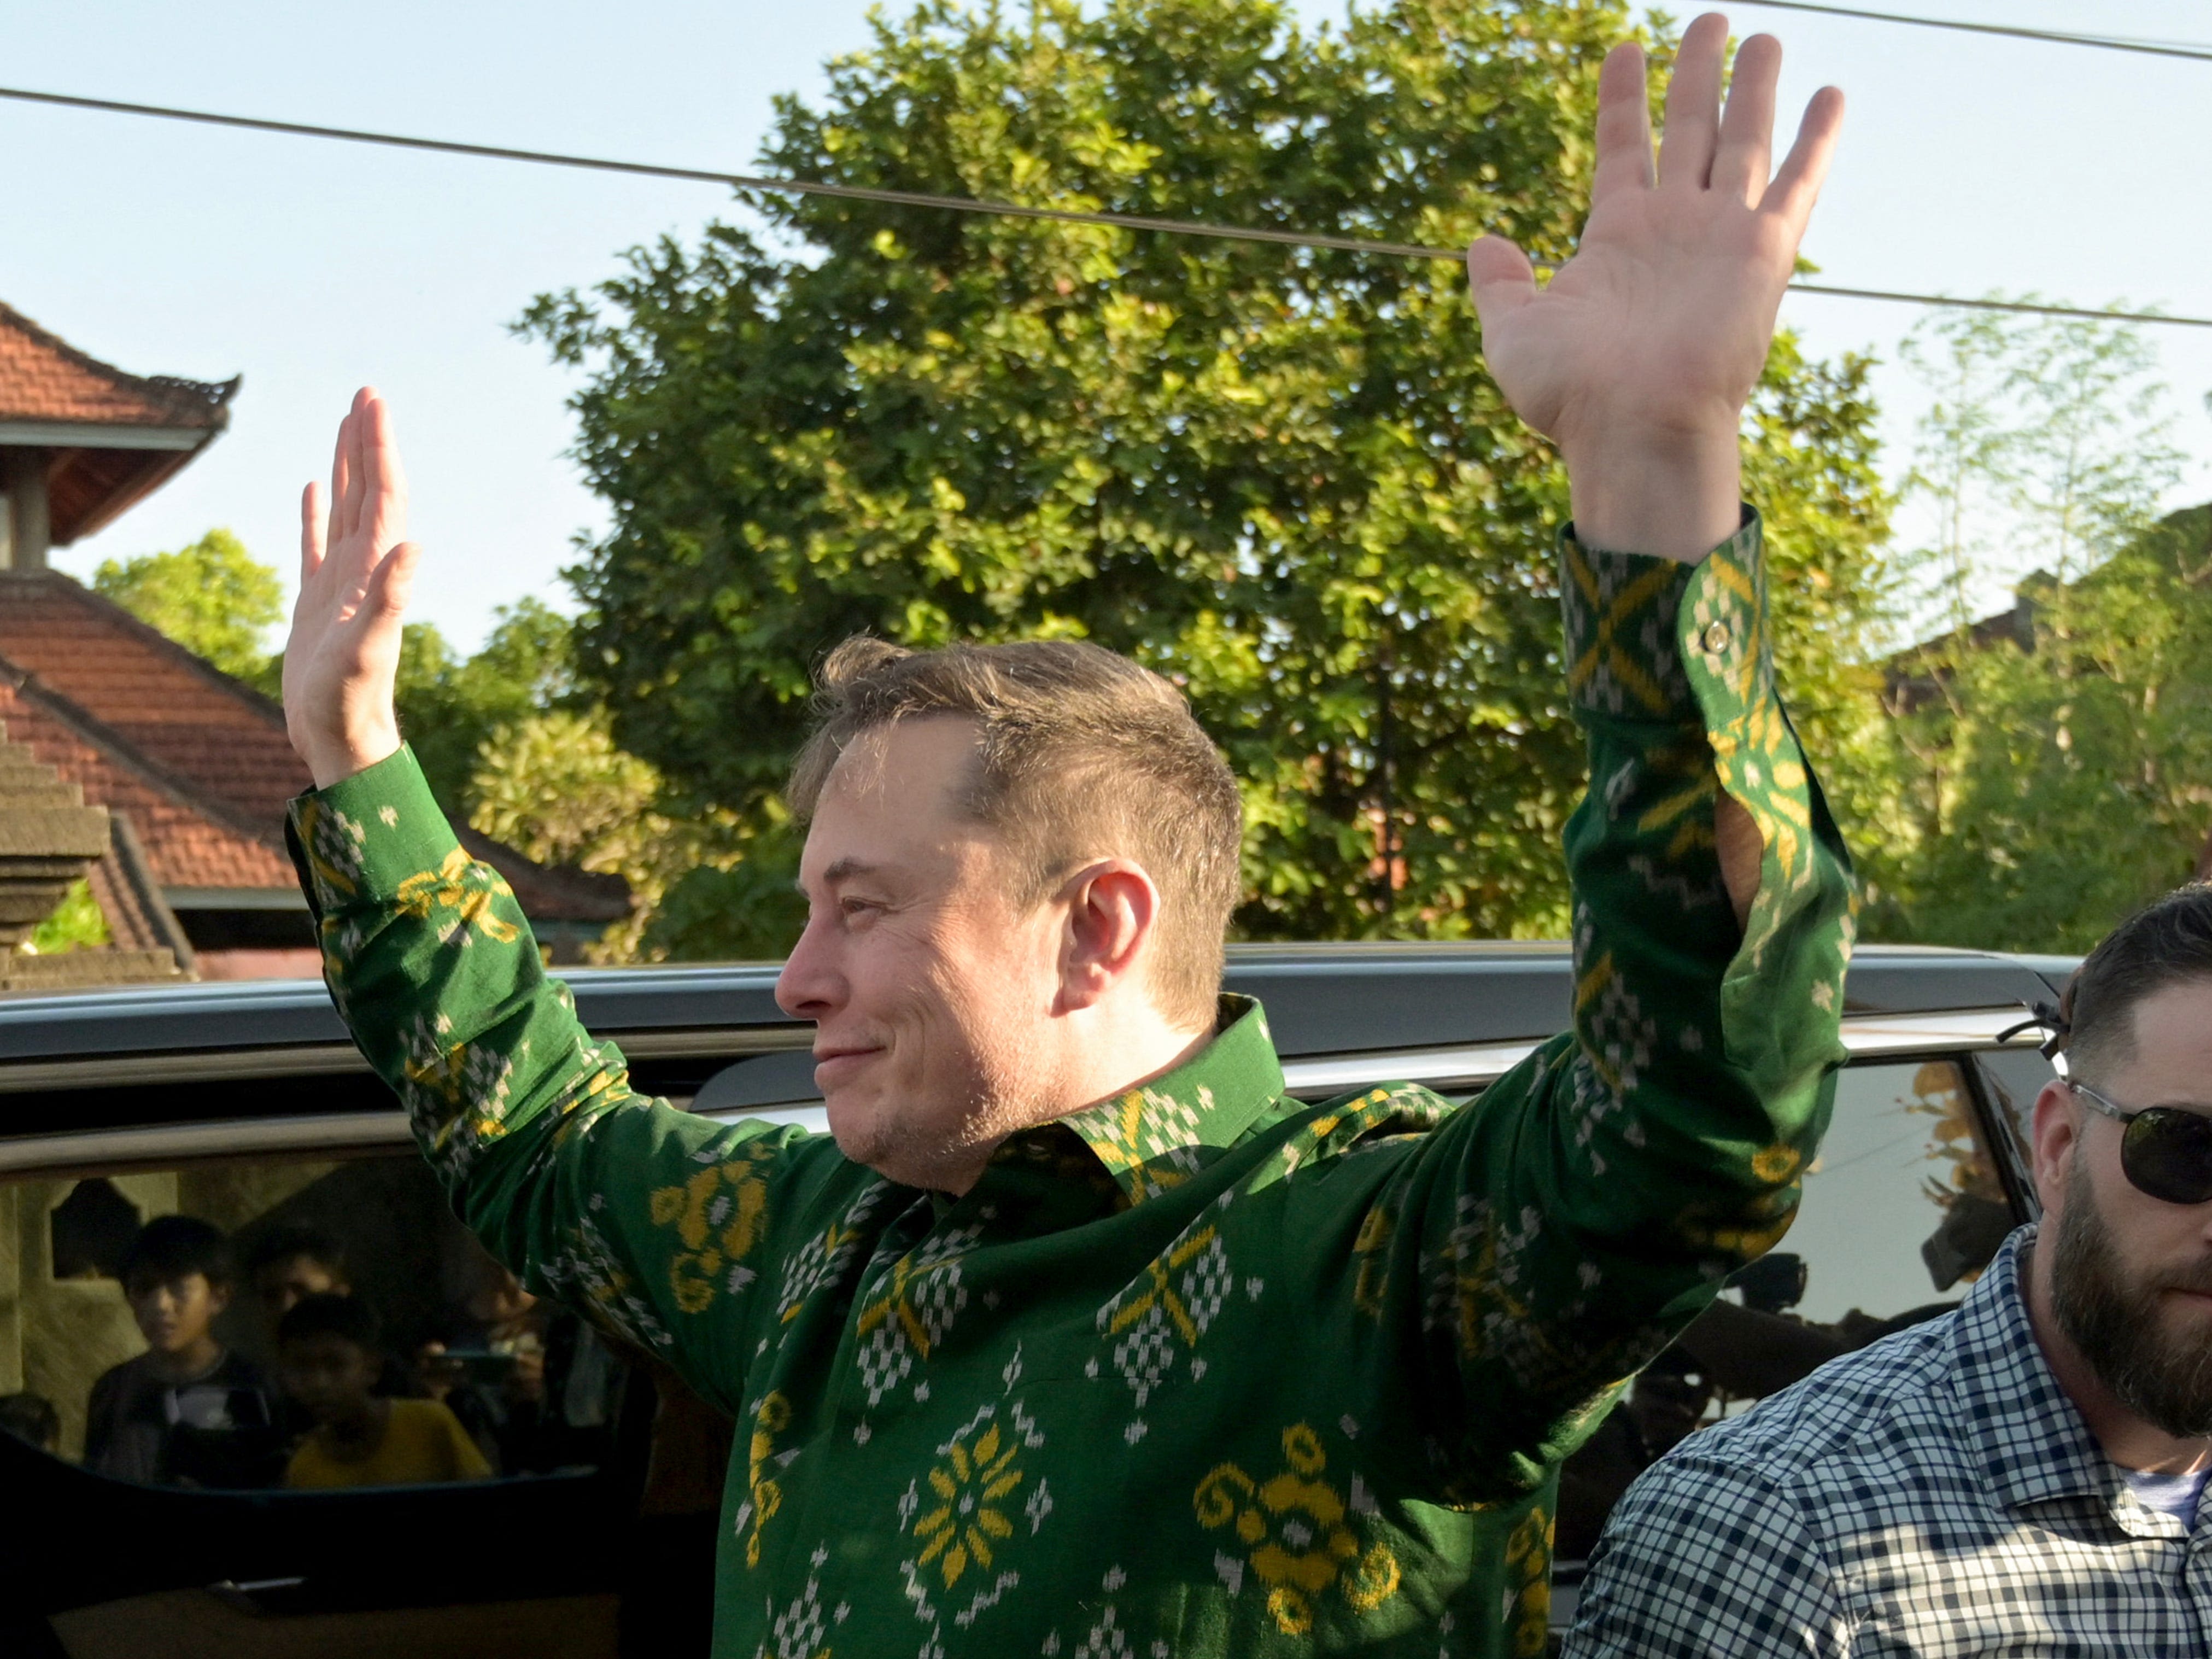 Elon Musk is serving up some Bali swag